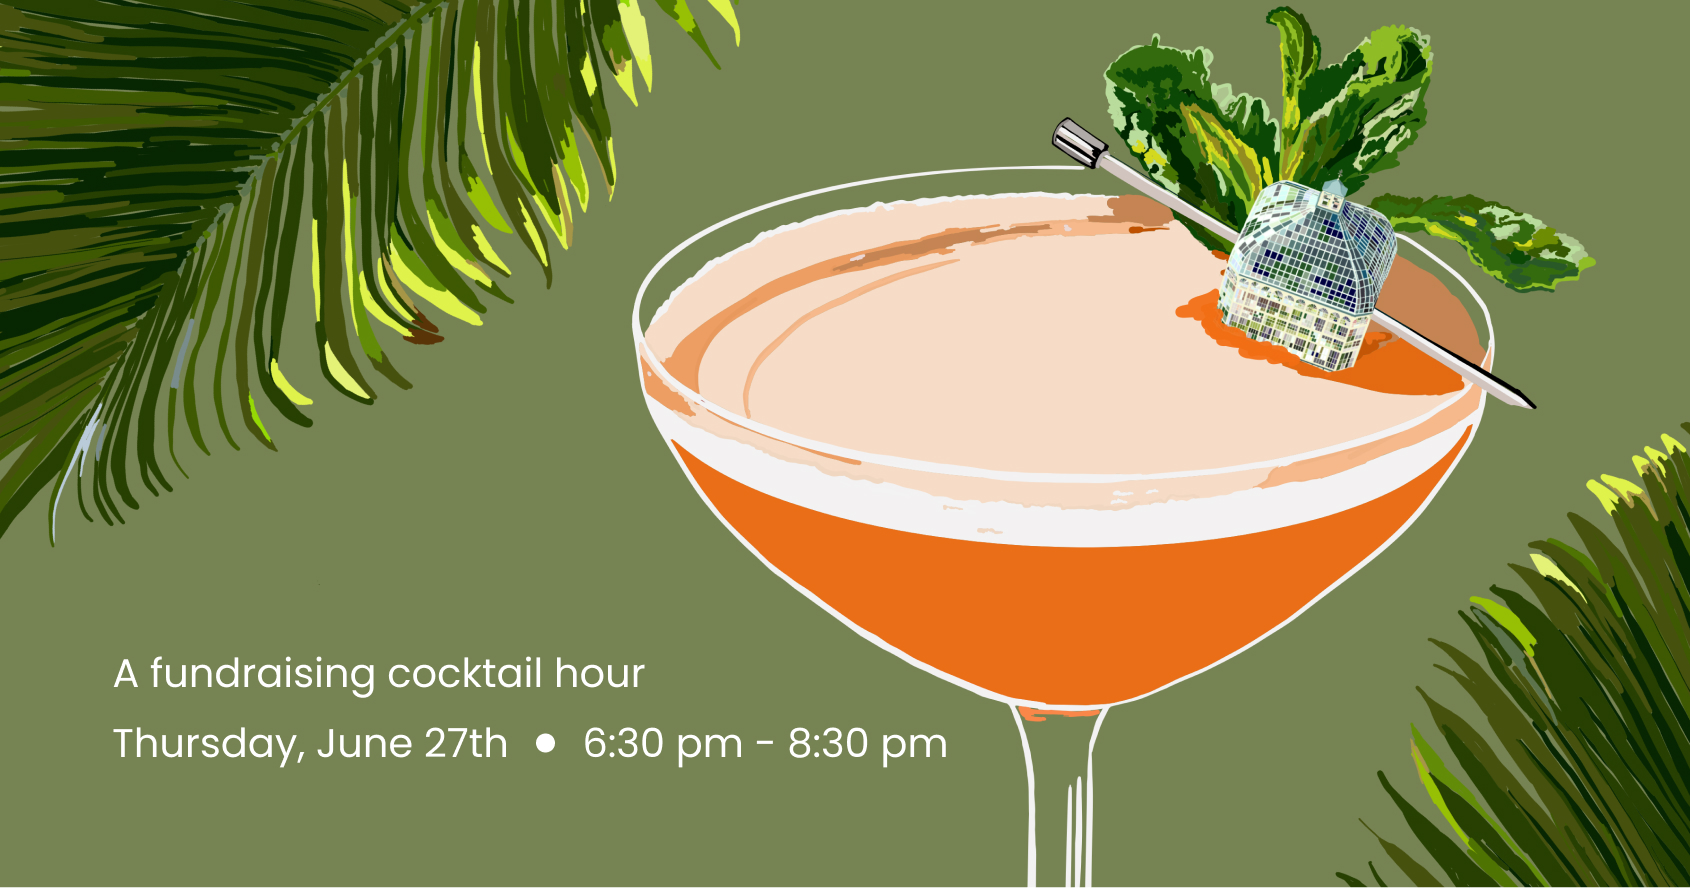 An image created for the Cocktails at the Conservatory event. Palm fronds frame the image of a cocktail, with a tiny version of the Palm House as a garnish.